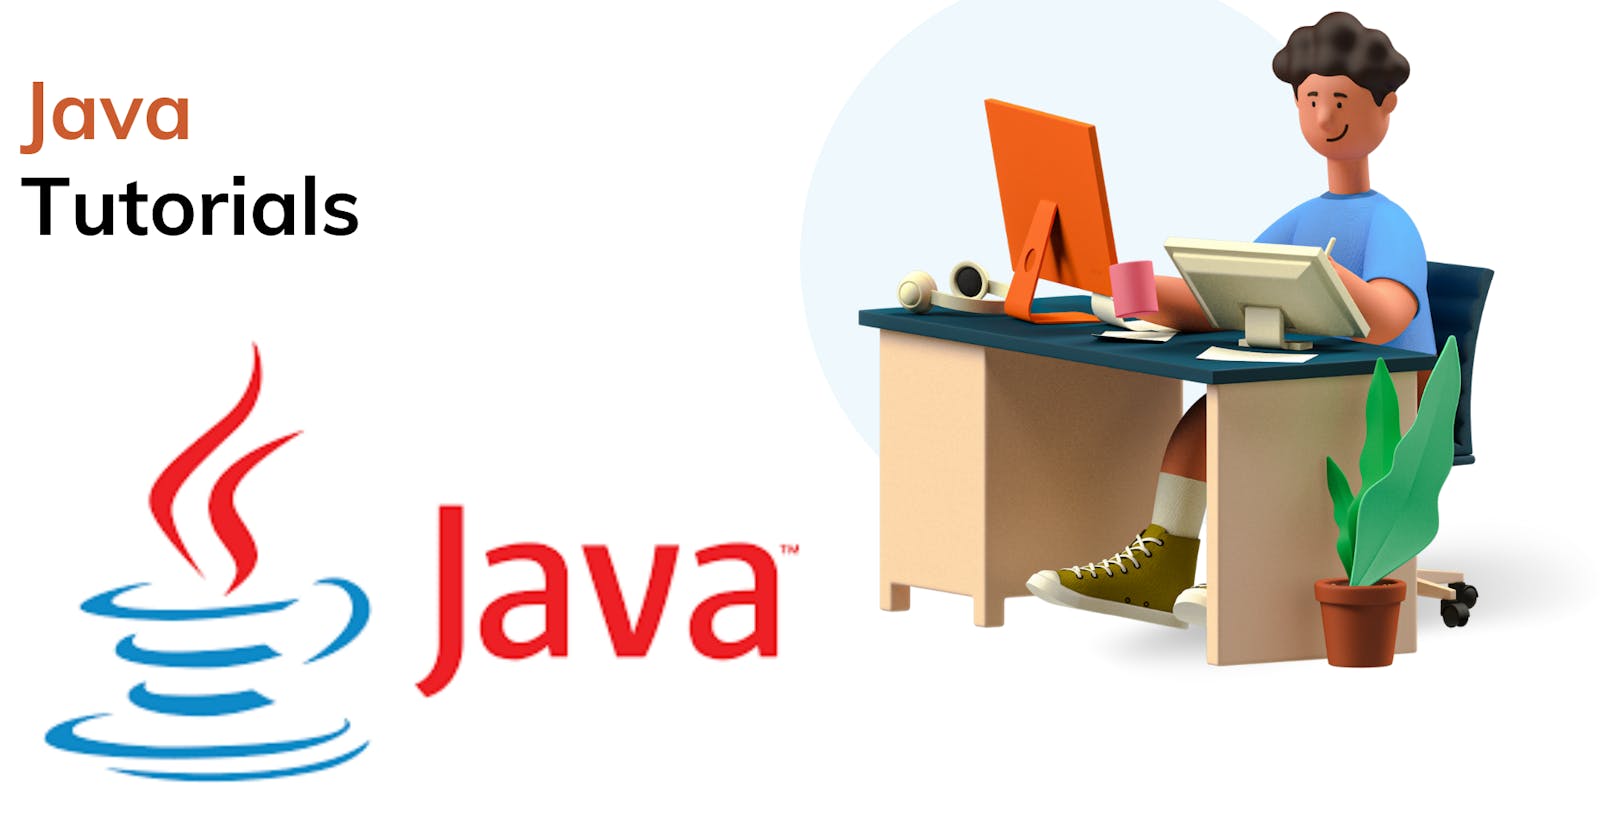 How to manage multiple Java\JDK versions locally?